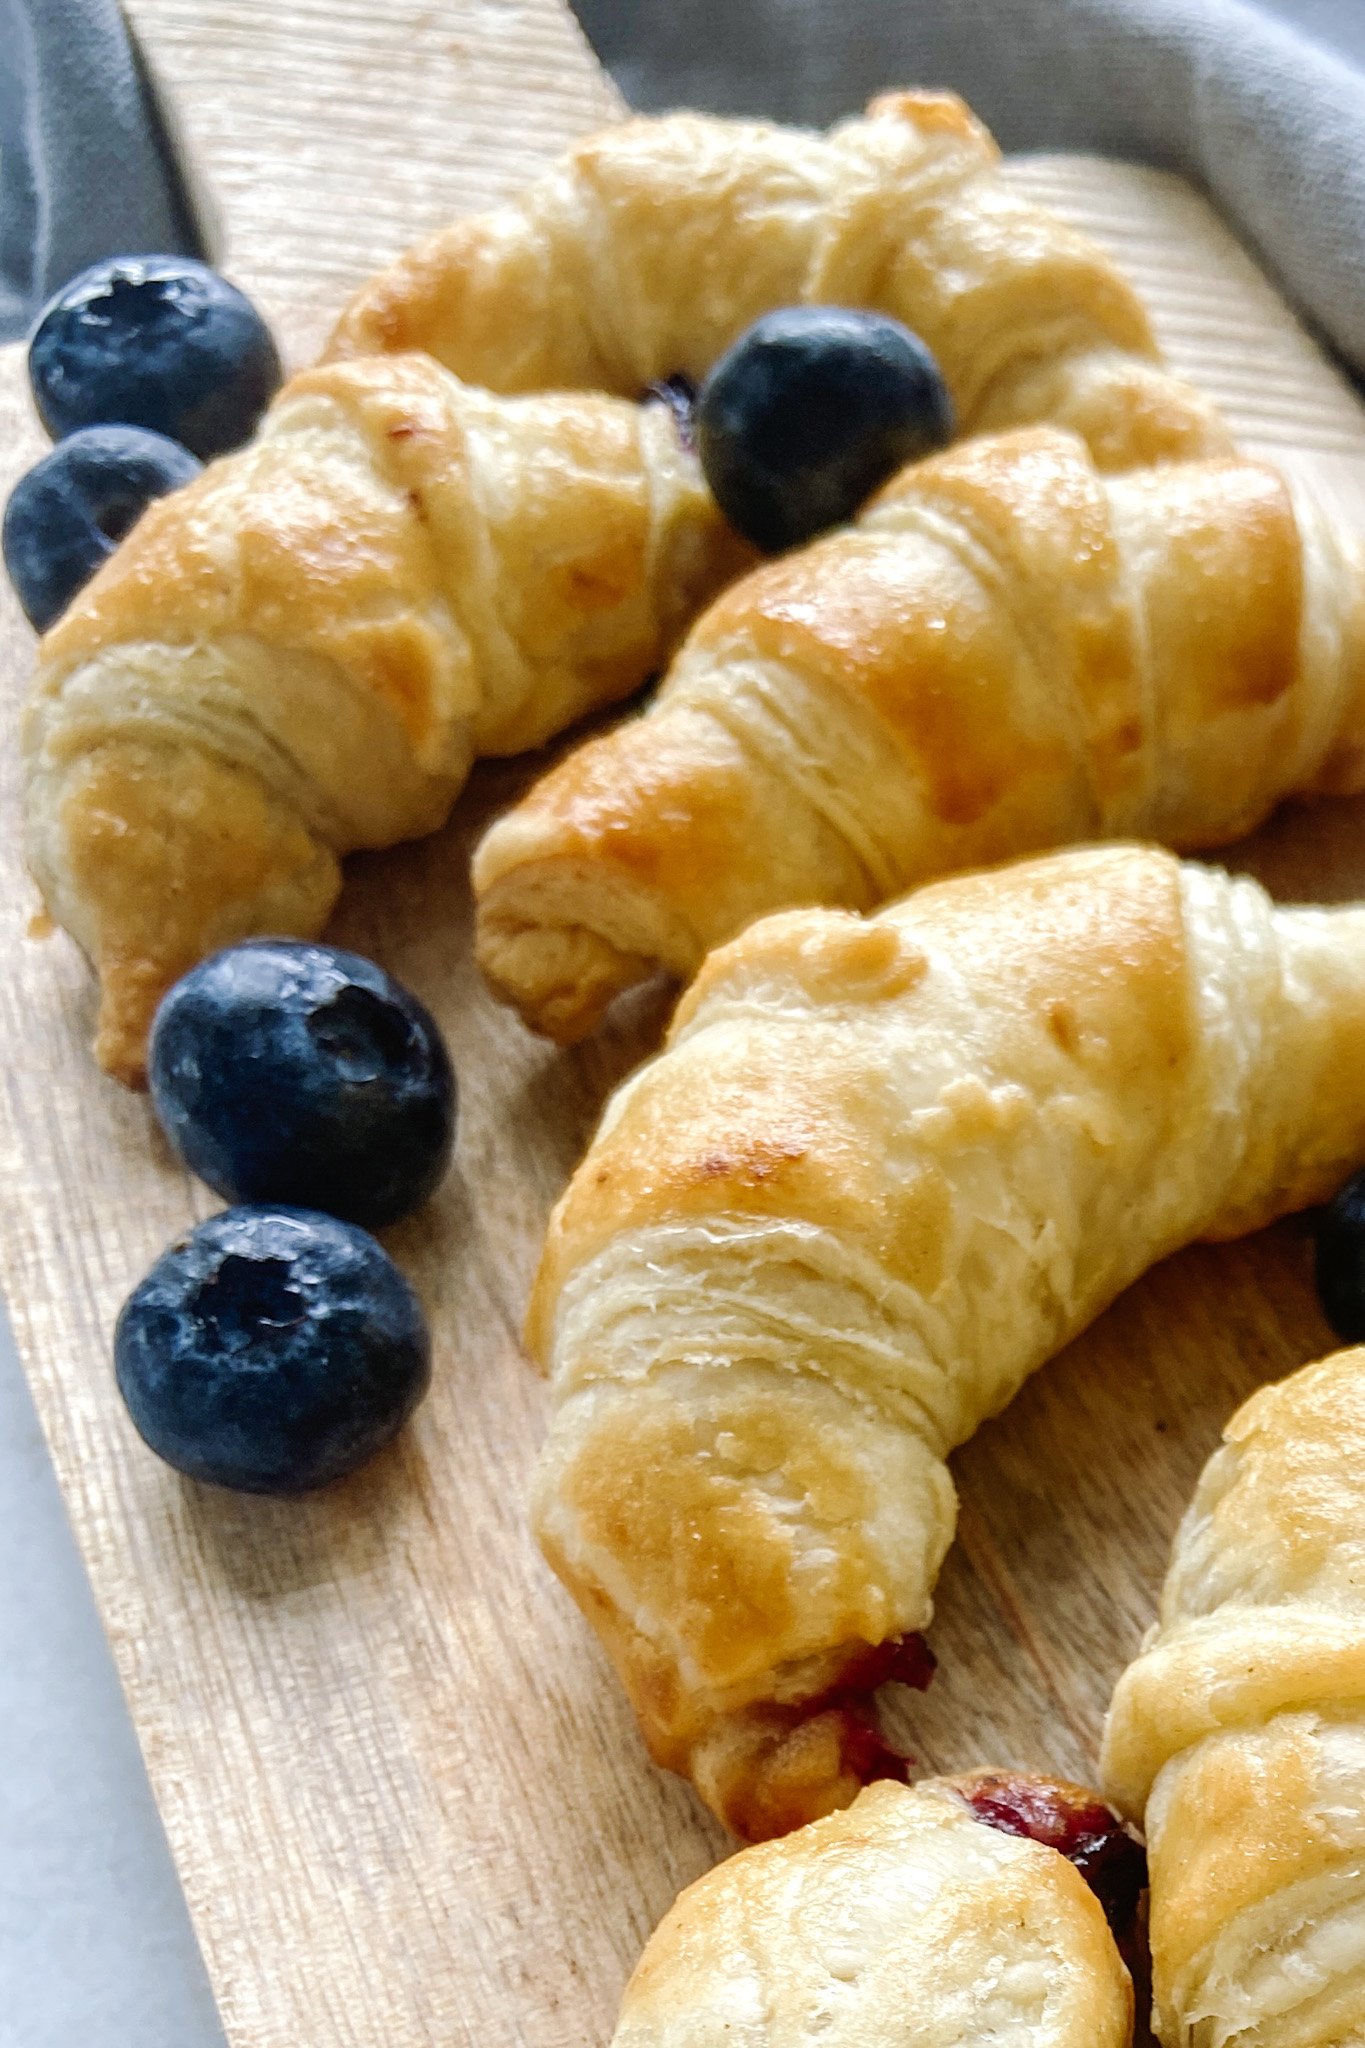 Mini blueberry croissants served on a wooden cutting board with blueberries